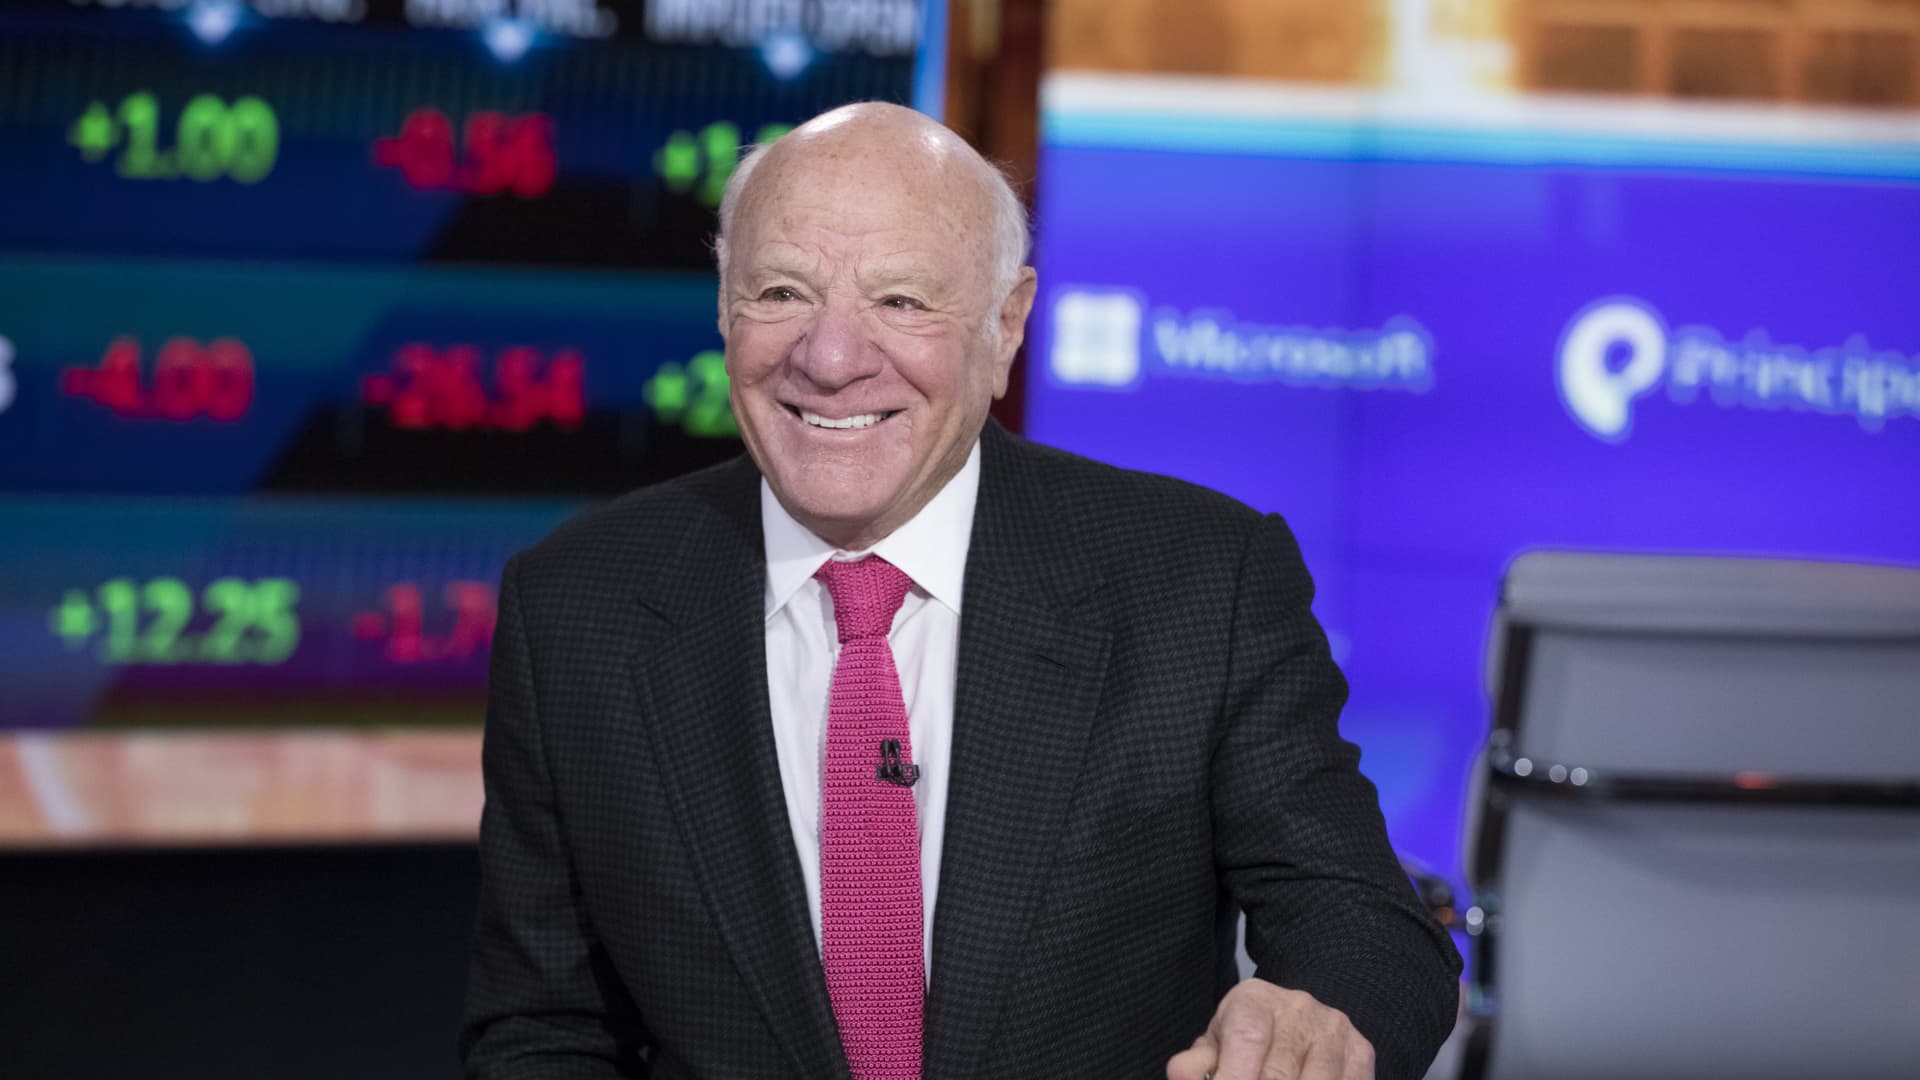 Trump Media is ‘a scam’ and people buying its stock are ‘dopes,’ Barry Diller says